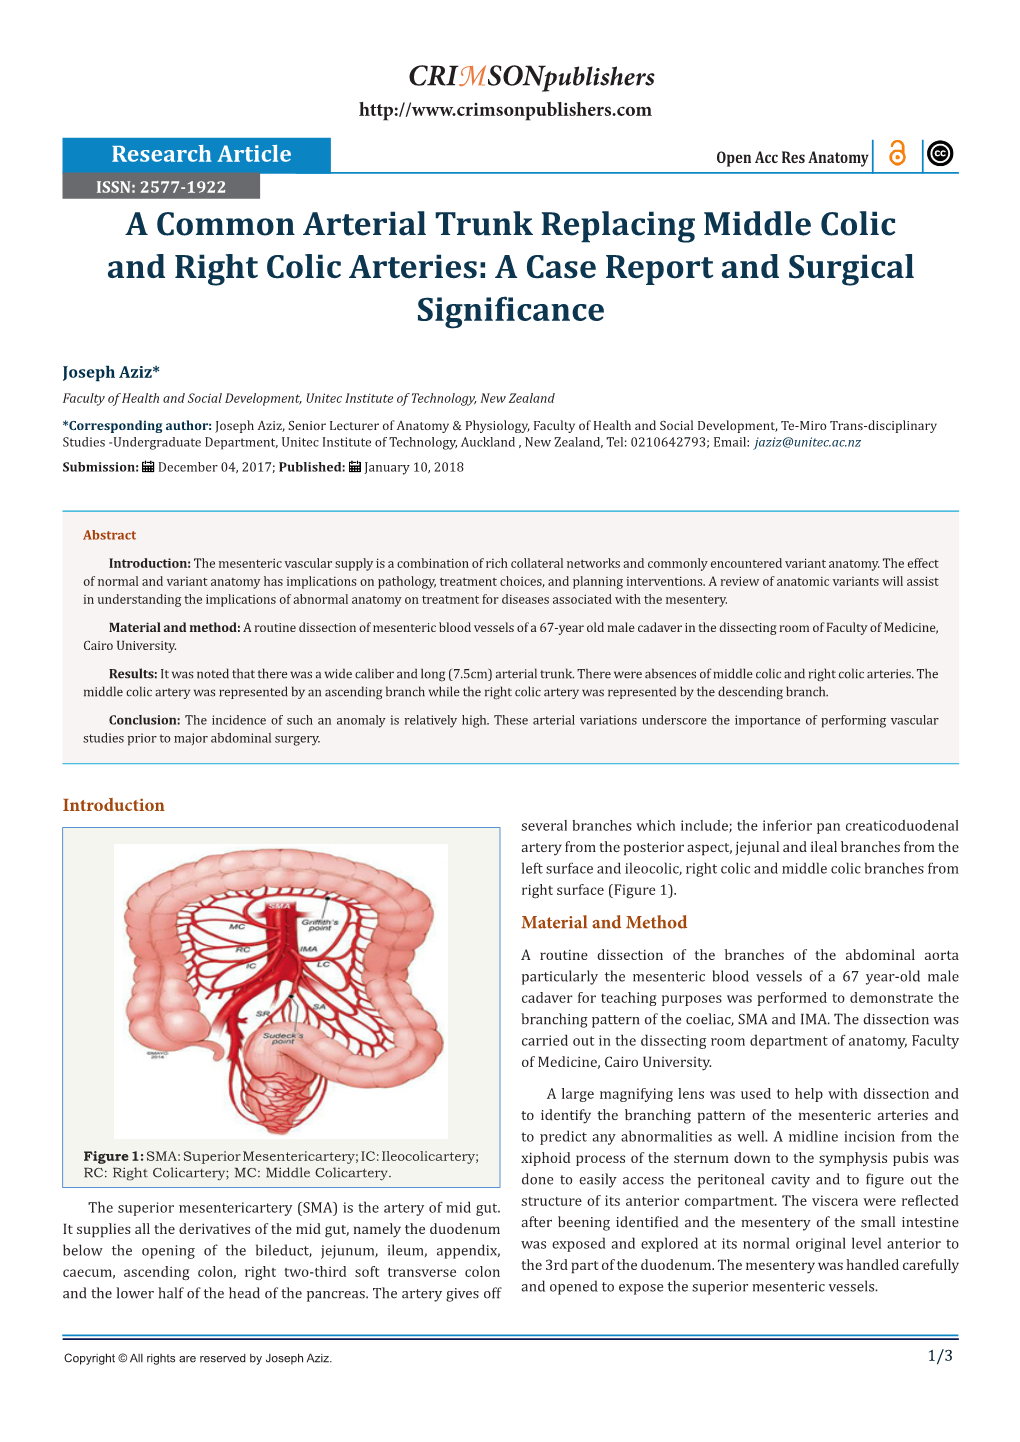 A Common Arterial Trunk Replacing Middle Colic and Right Colic Arteries: a Case Report and Surgical Significance